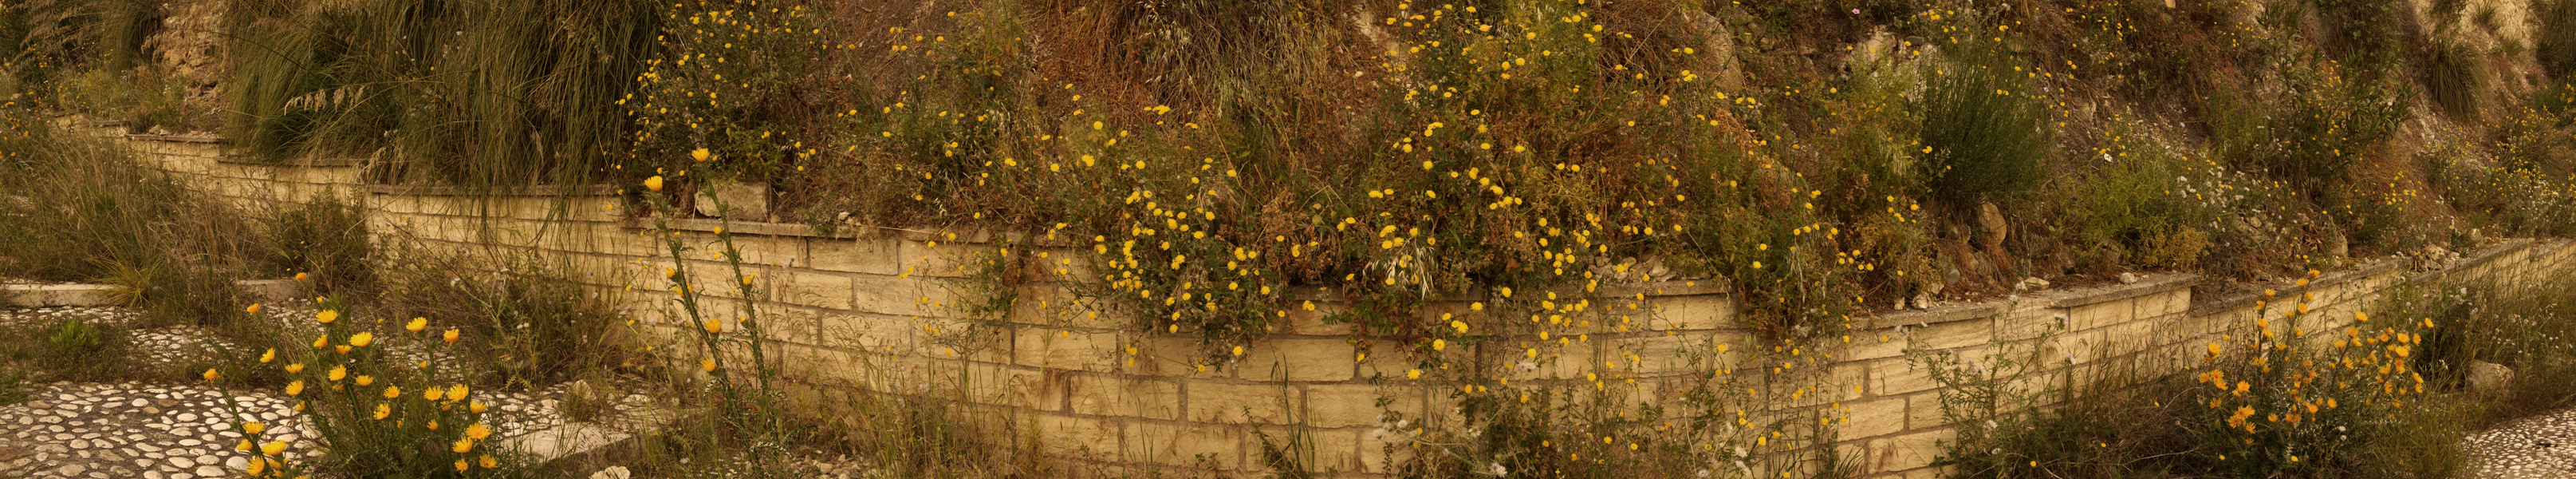 Sciacca Flowers